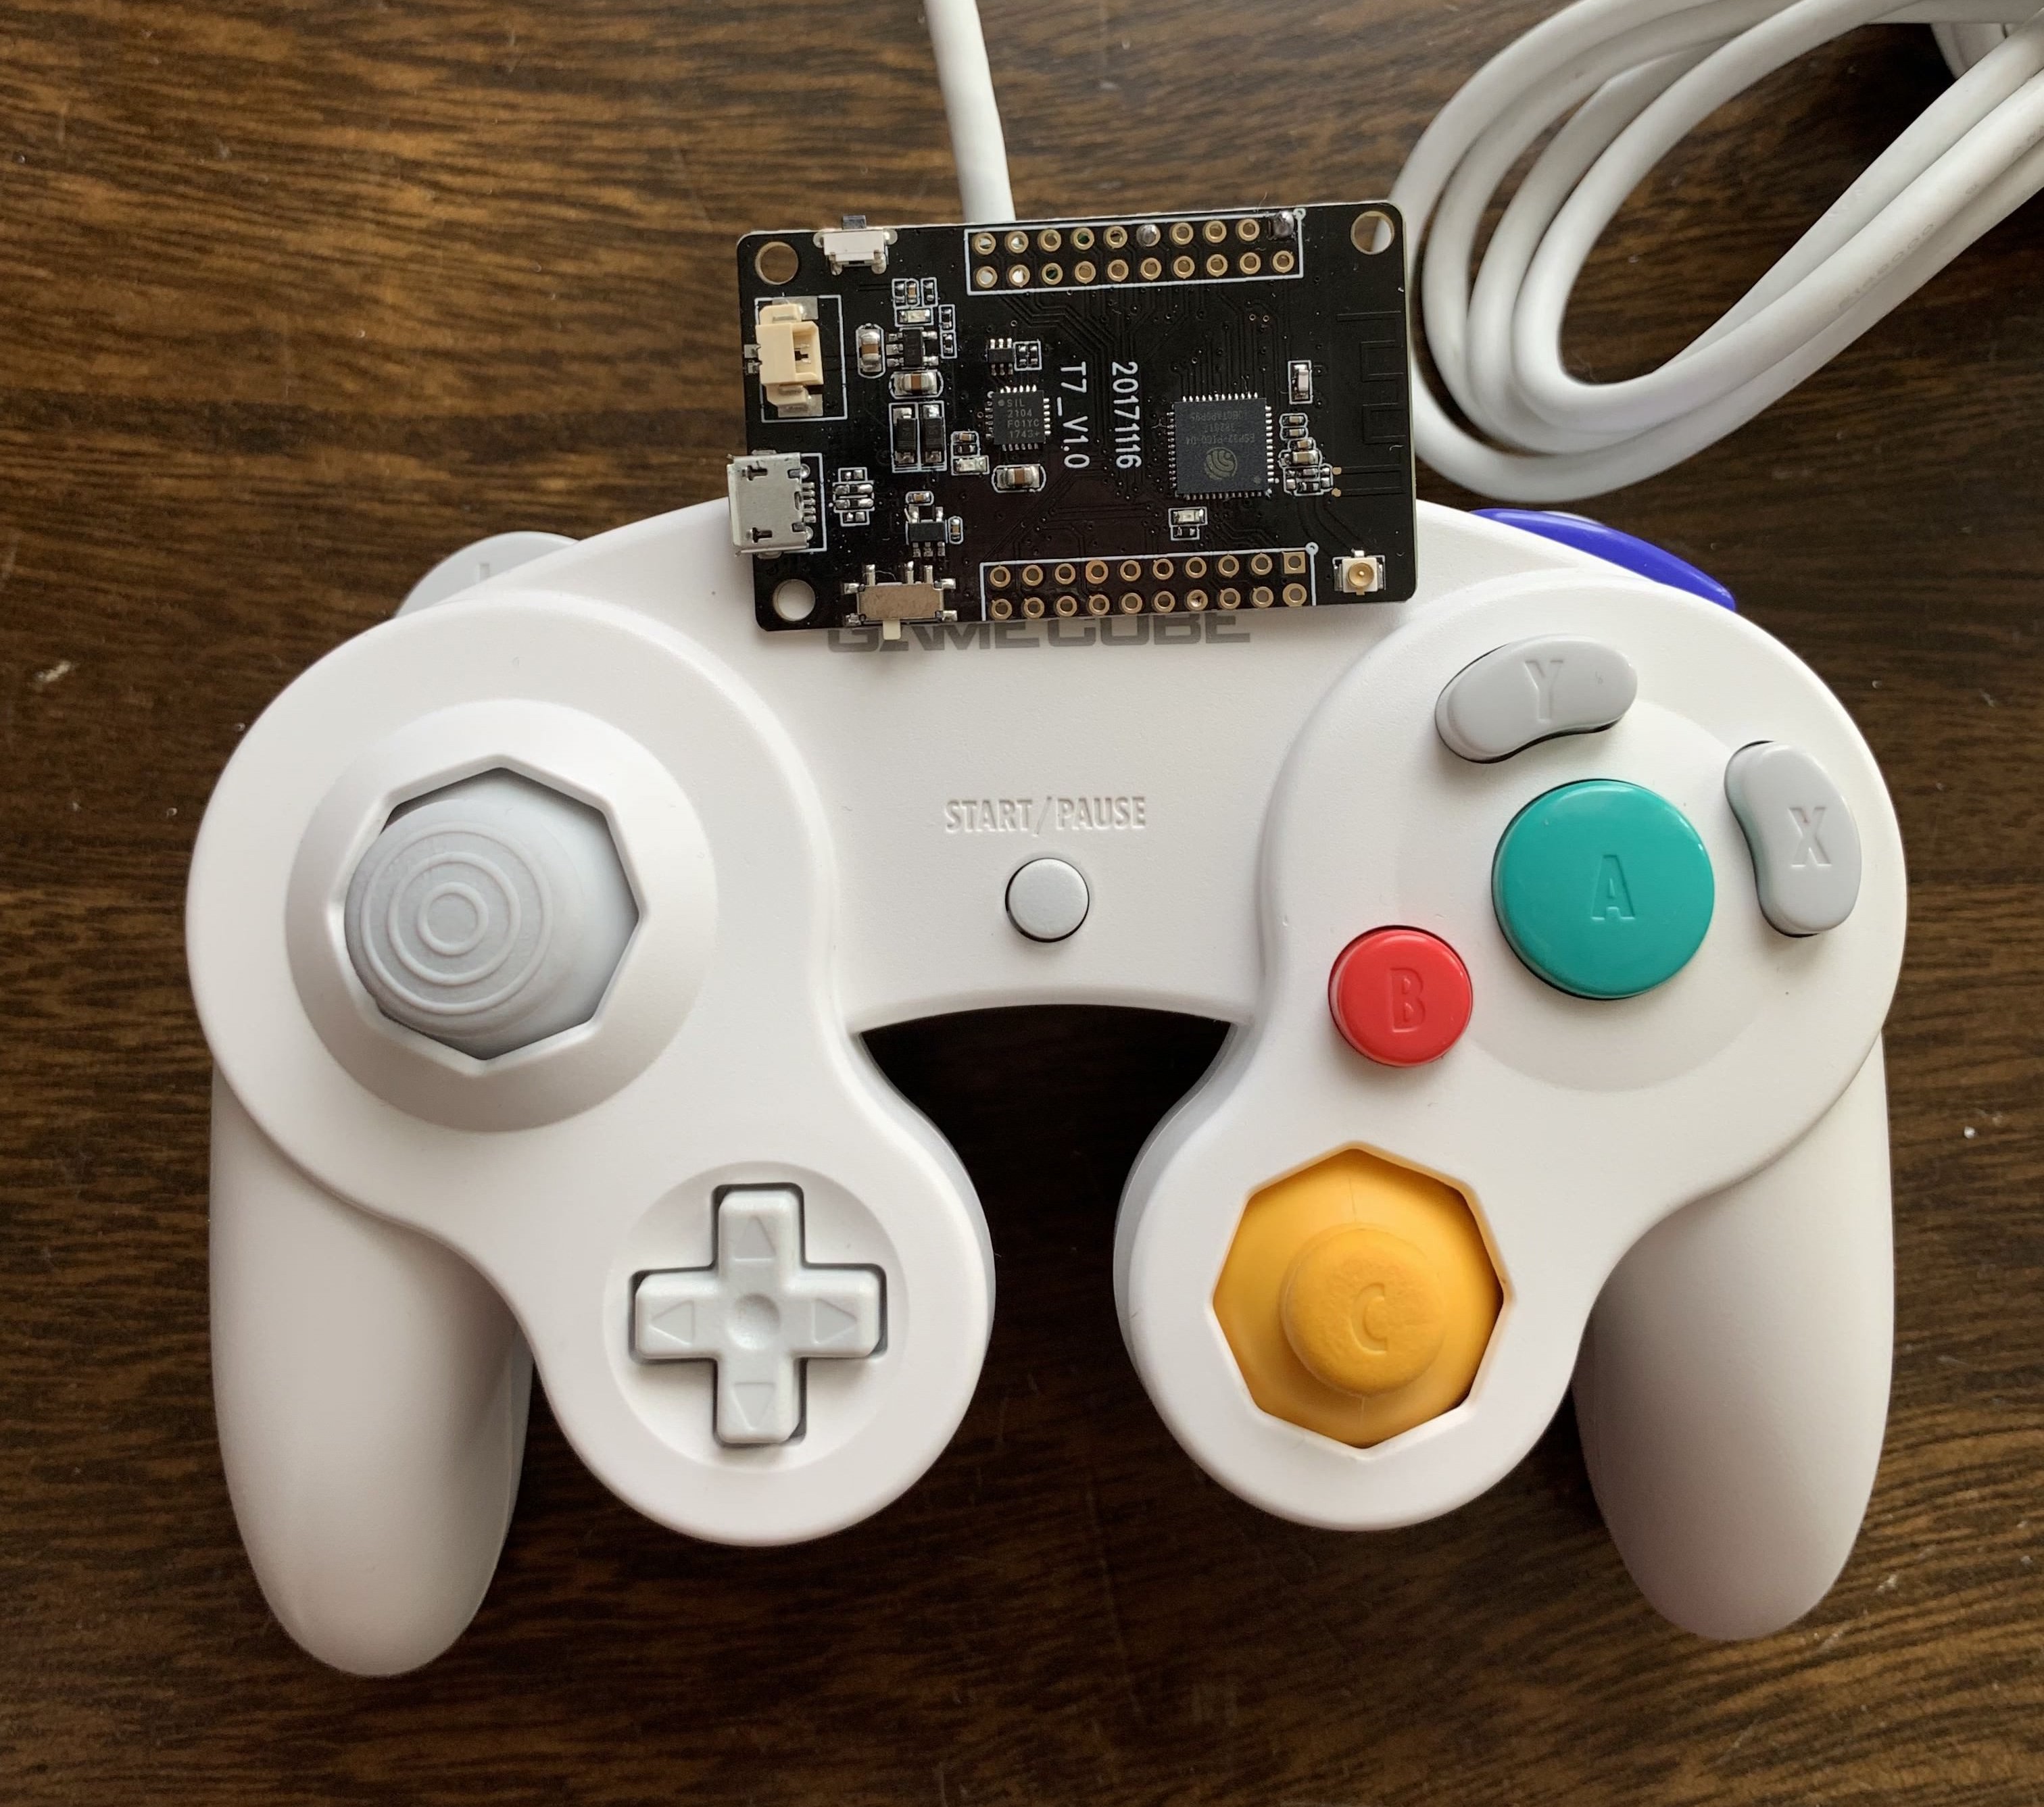 gamecube controller for wii u games mod